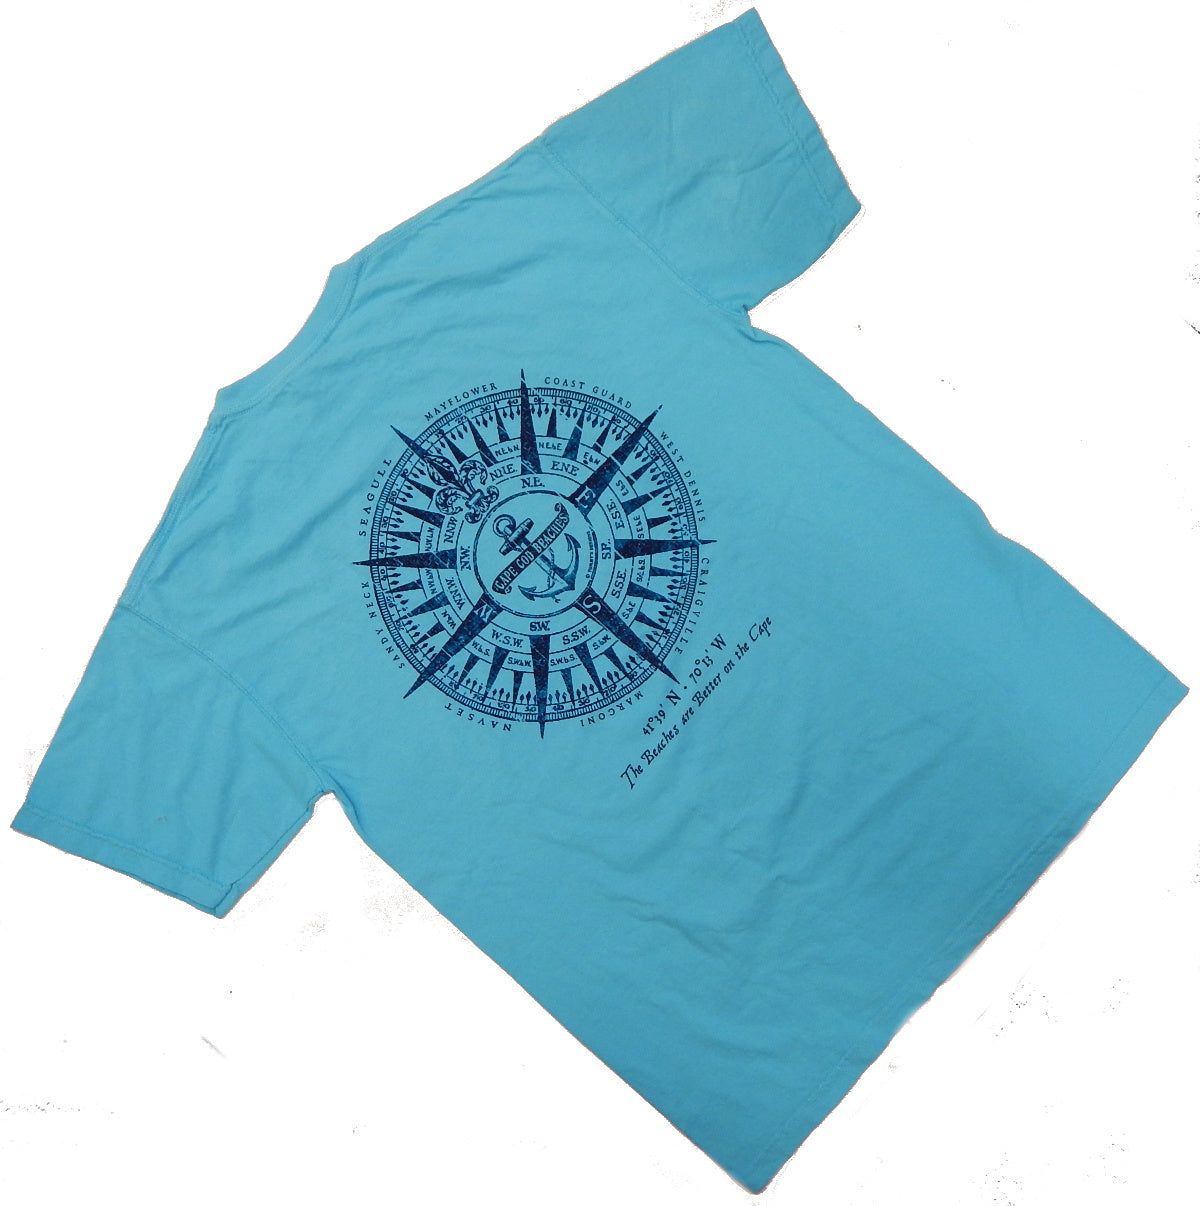 Beaches of Cape Cod<br>Pigment-Dyed Short Sleeve T-Shirt<br>by Tommy's Designs